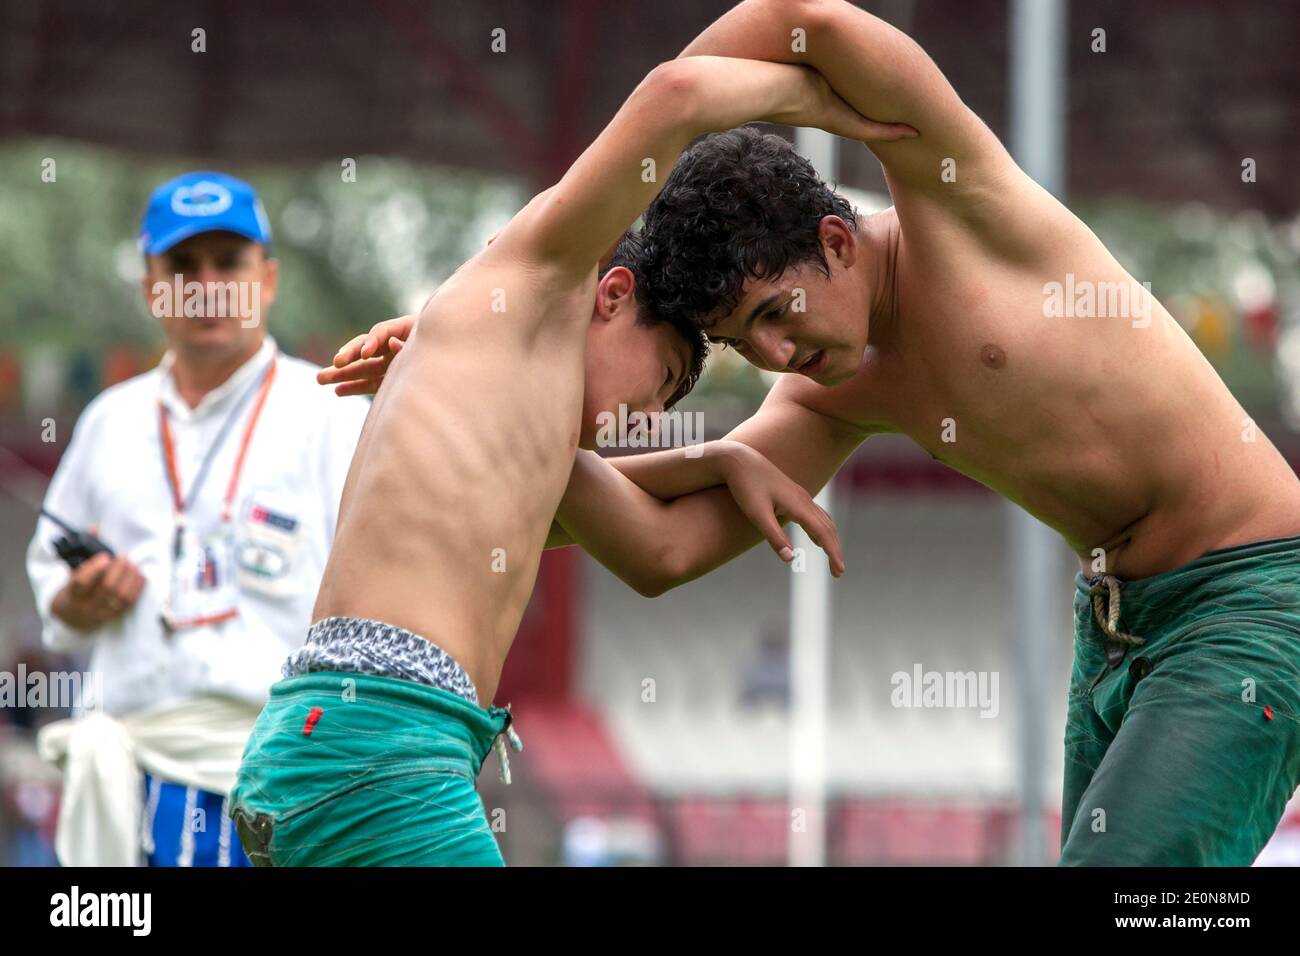 Teenage Wrestlers Fight For Supremacy During Competition At The